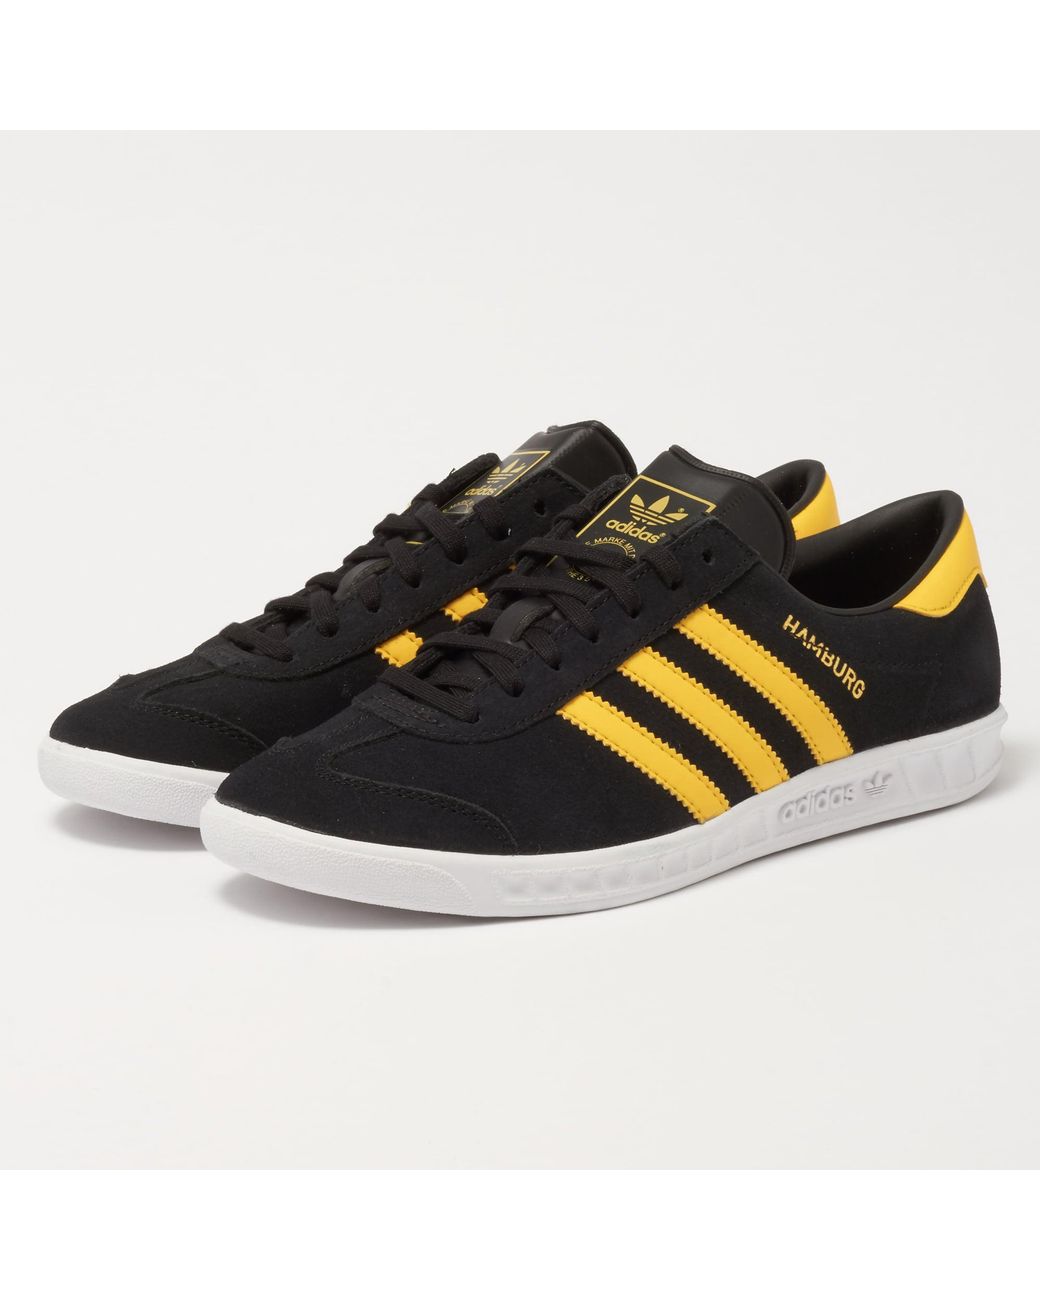 jump in Put away clothes Careful reading black and yellow adidas shoes ...